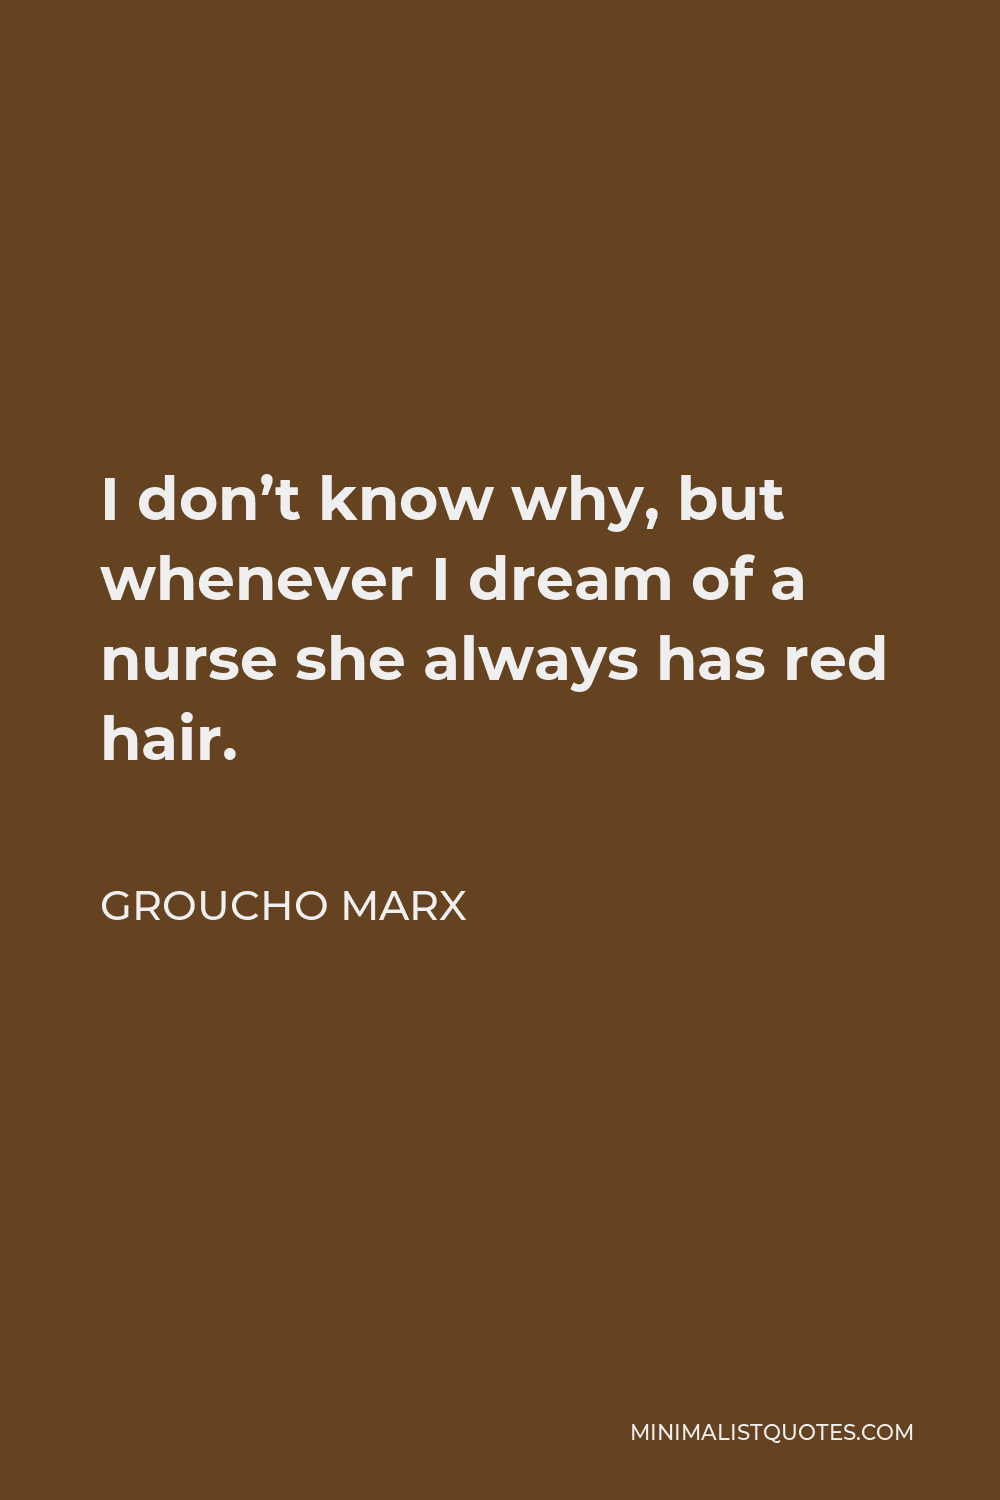 Groucho Marx Quote - I don’t know why, but whenever I dream of a nurse she always has red hair.